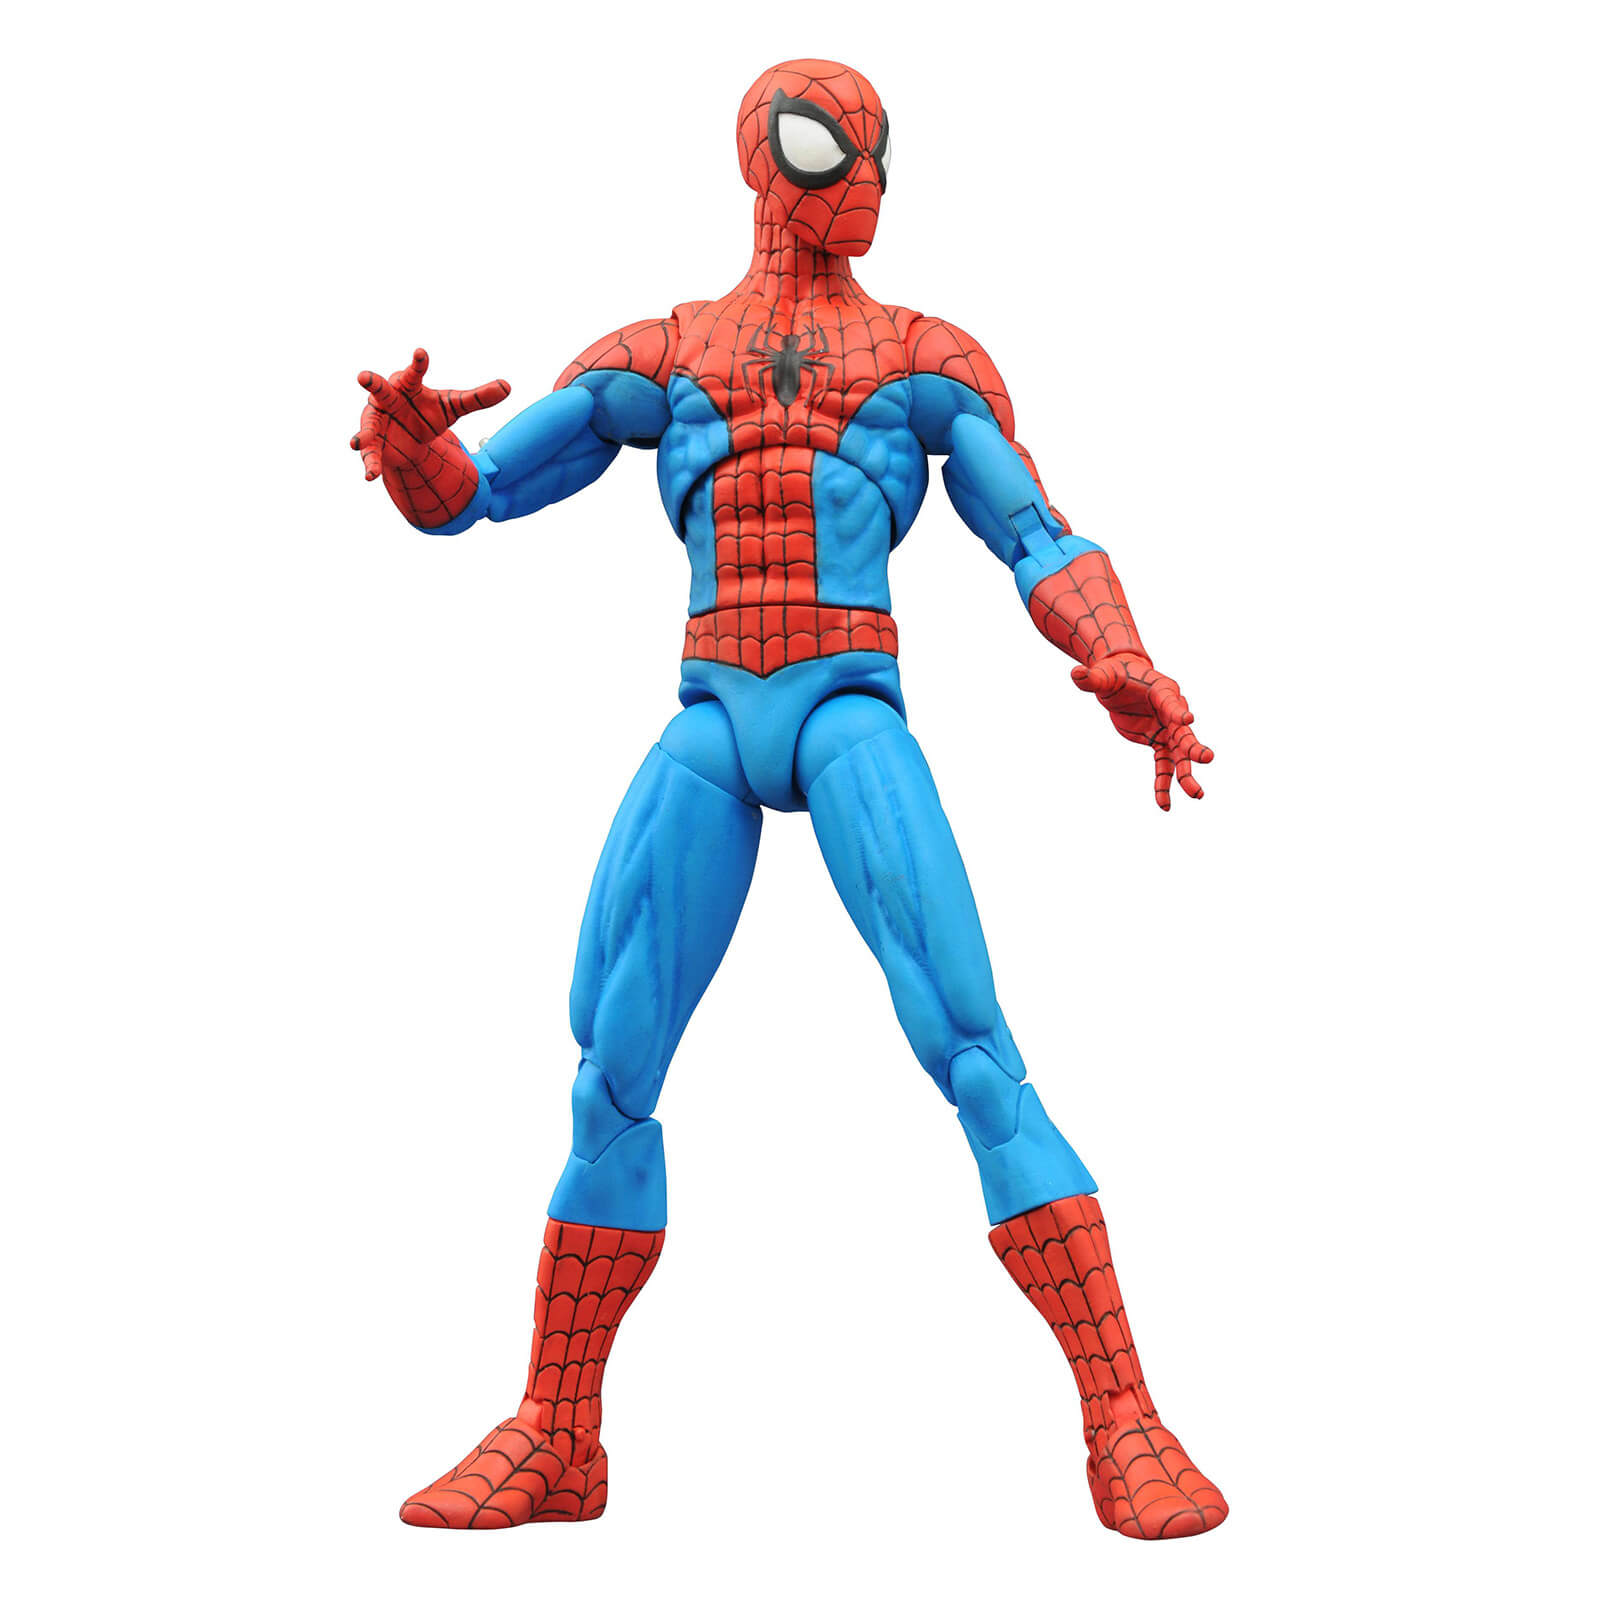 Diamond Select Marvel Select Spectacular Spider-Man Action Figure